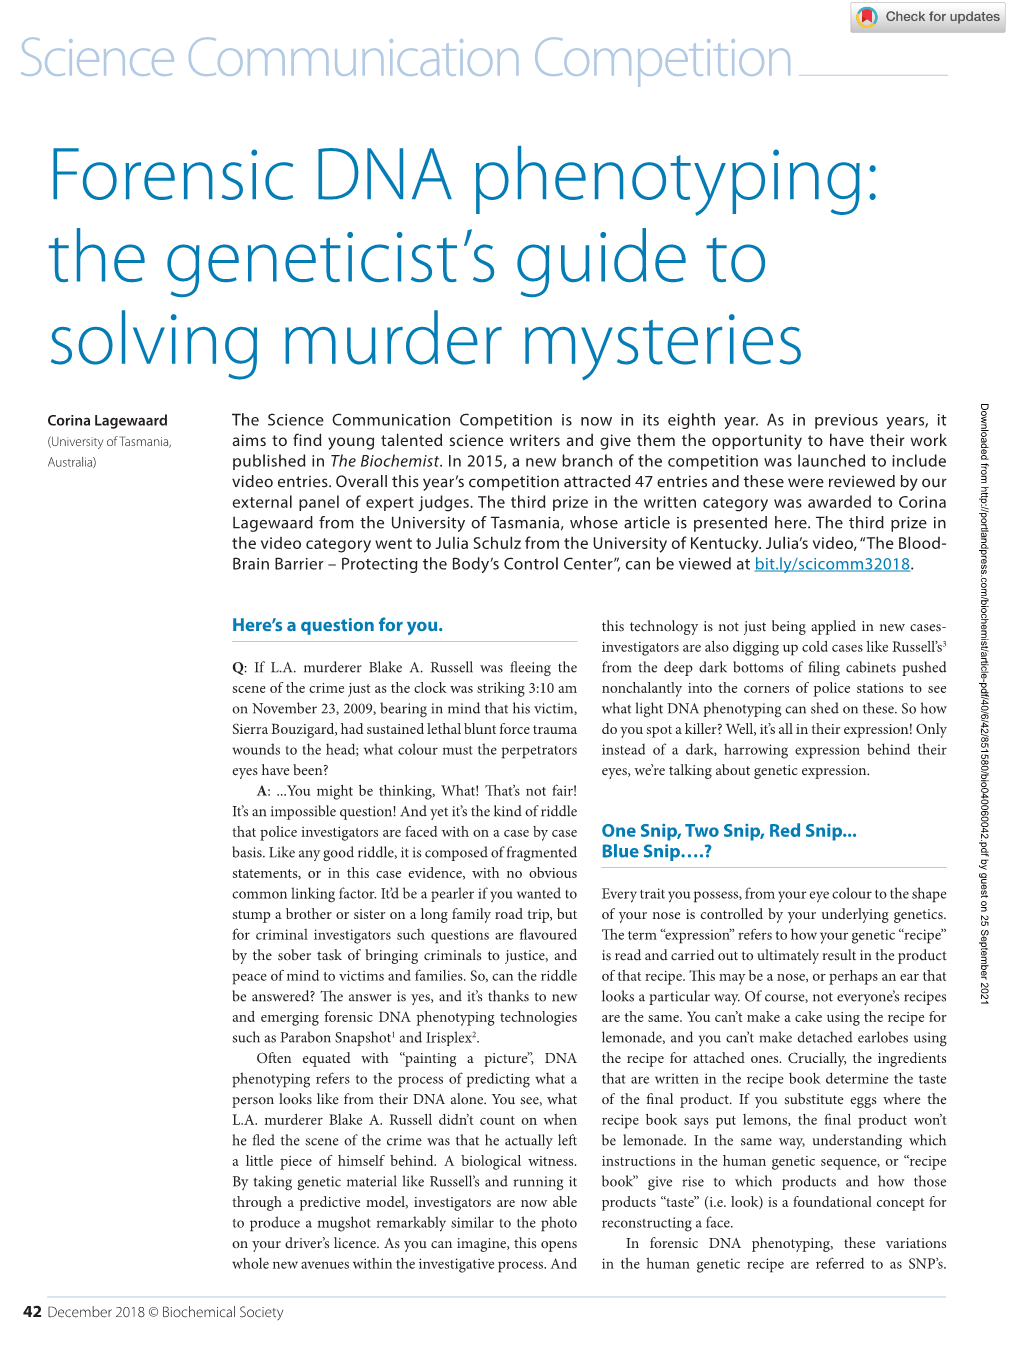 Forensic DNA Phenotyping: the Geneticist's Guide to Solving Murder